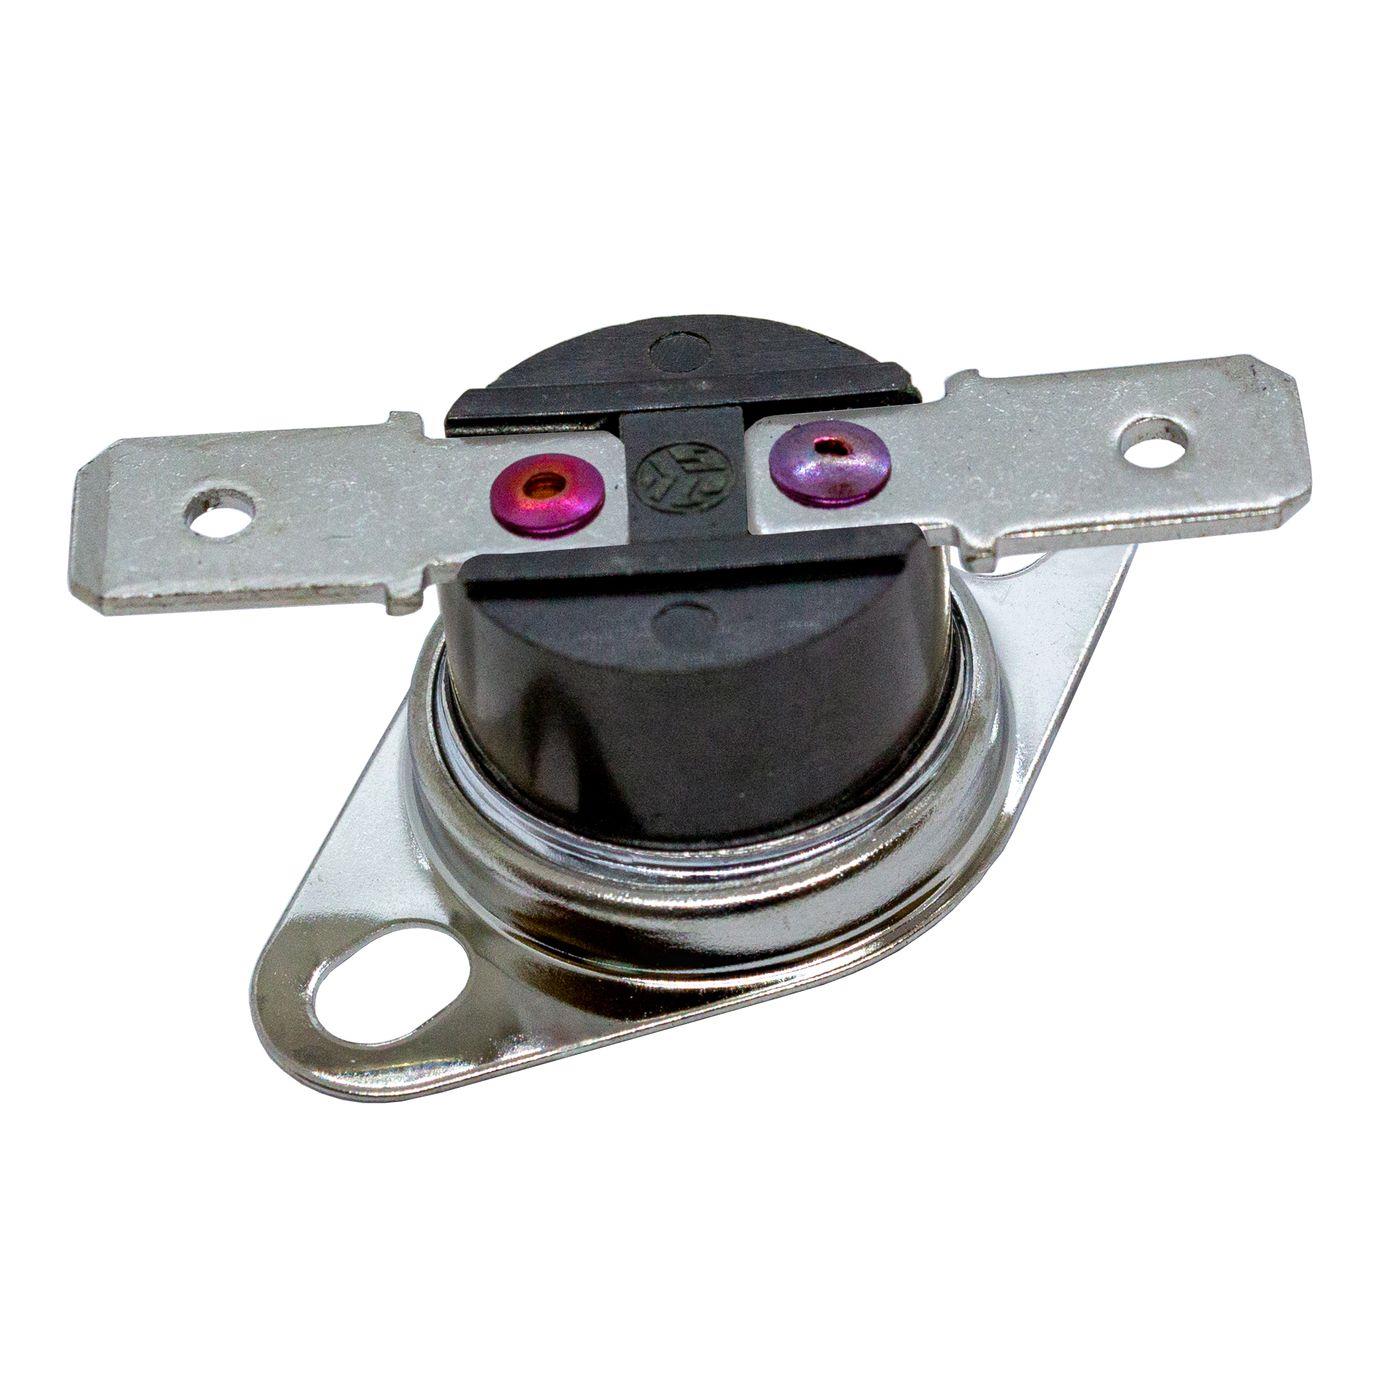 Thermal switch 50°C NC contact 250V 10A Temperature switch thermostat KSD301 Bimetal Thermal protection